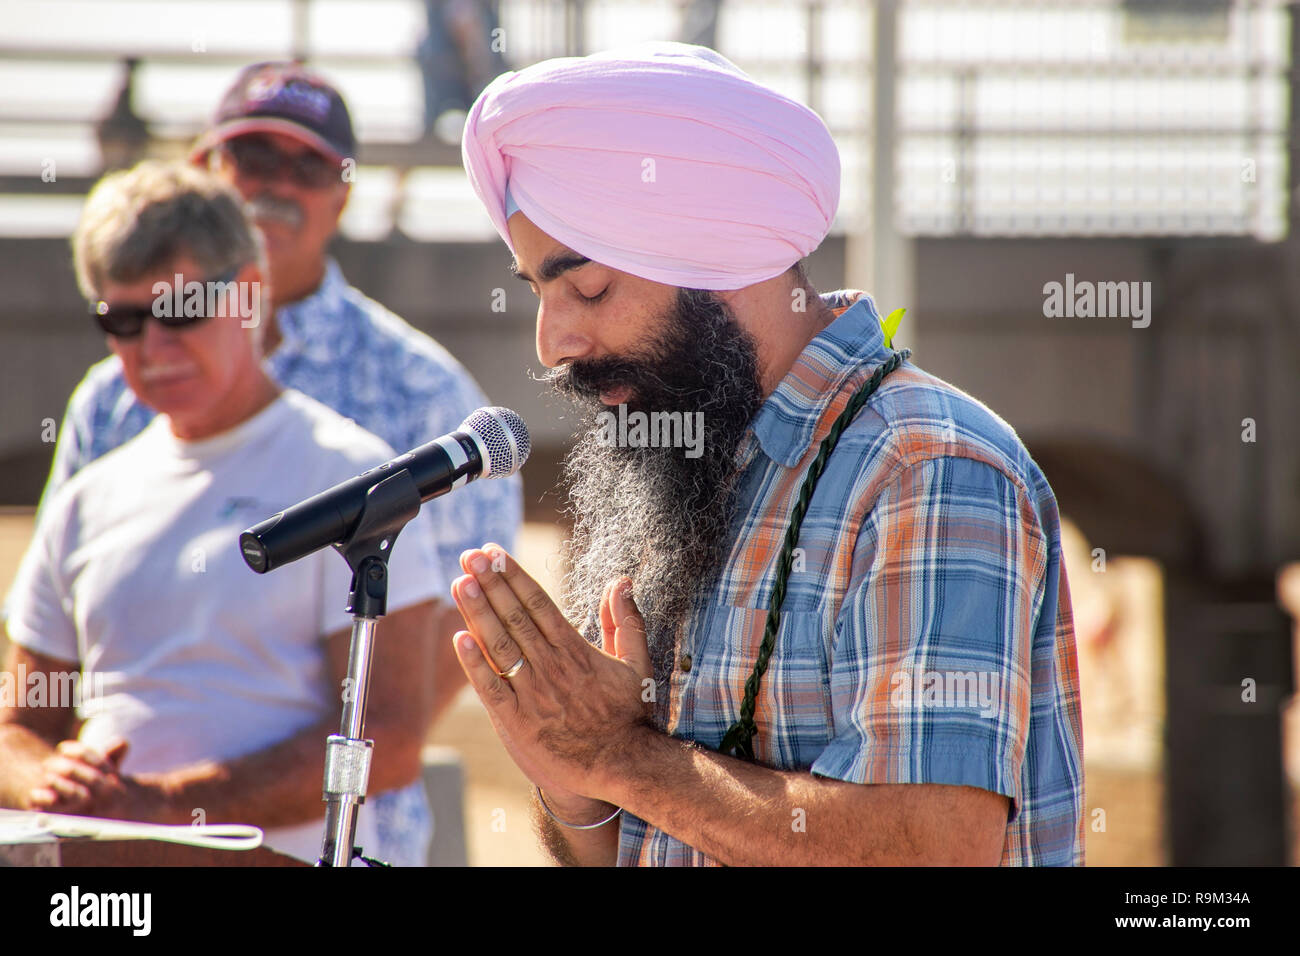 In beard and turban, a Sikh community speaker offers a prayer at an outdoor interfaith observance in Huntington Beach, CA. Stock Photo